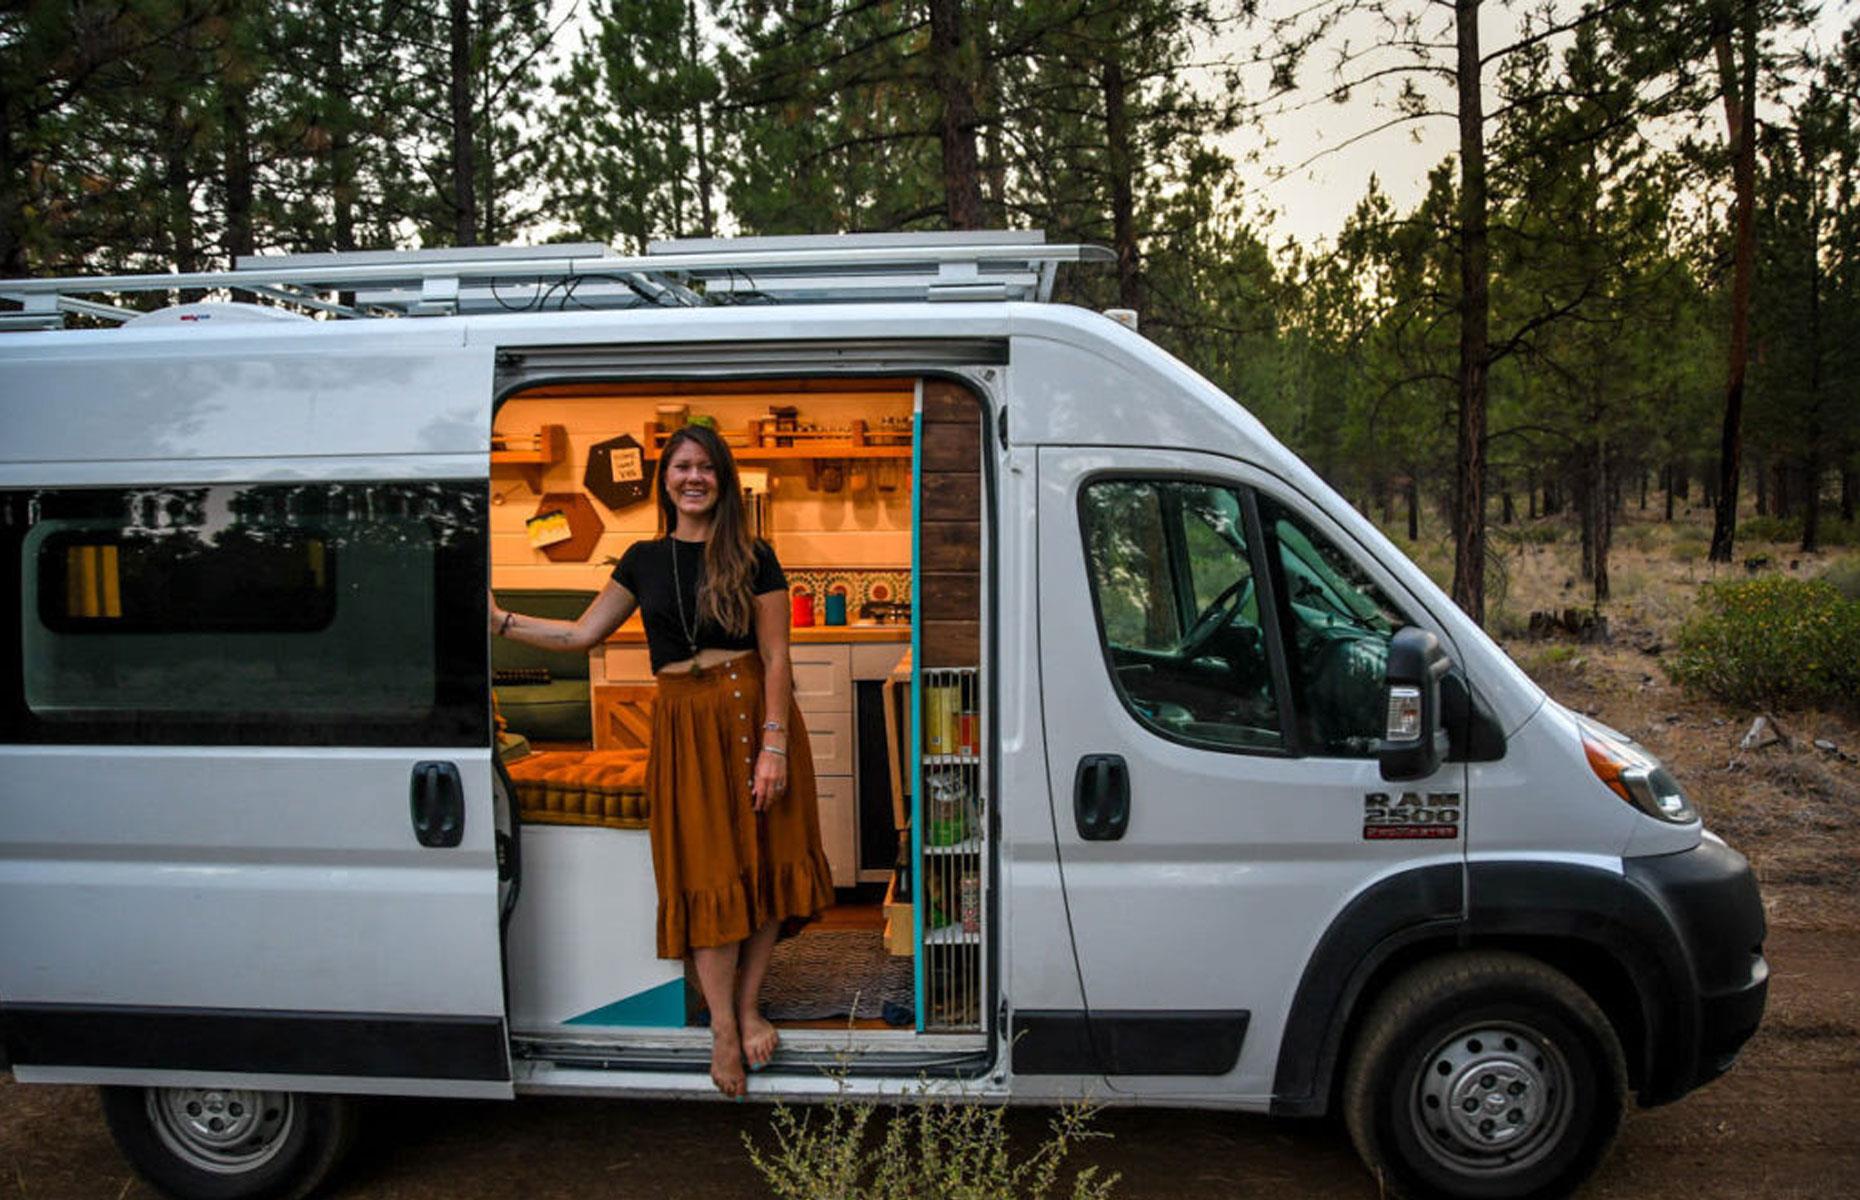 <p>Having converted three vans from scratch, the couple have become professionals at building tiny homes on wheels. Their first van, Vinny, cost just £1,576 ($2,000) with a £788 ($1,000) conversion budget. Although basic, living in Vinny allowed them to fall in love with the idea of taking their home with them wherever they went. A few years later, with a larger budget, they built a dream van named Pearl. However, when starting a family, they realised the short wheelbase would not be big enough when two became three. Cue Lola, their latest vehicle – a Ram ProMaster 3500 extended version that suits the whole family.</p>